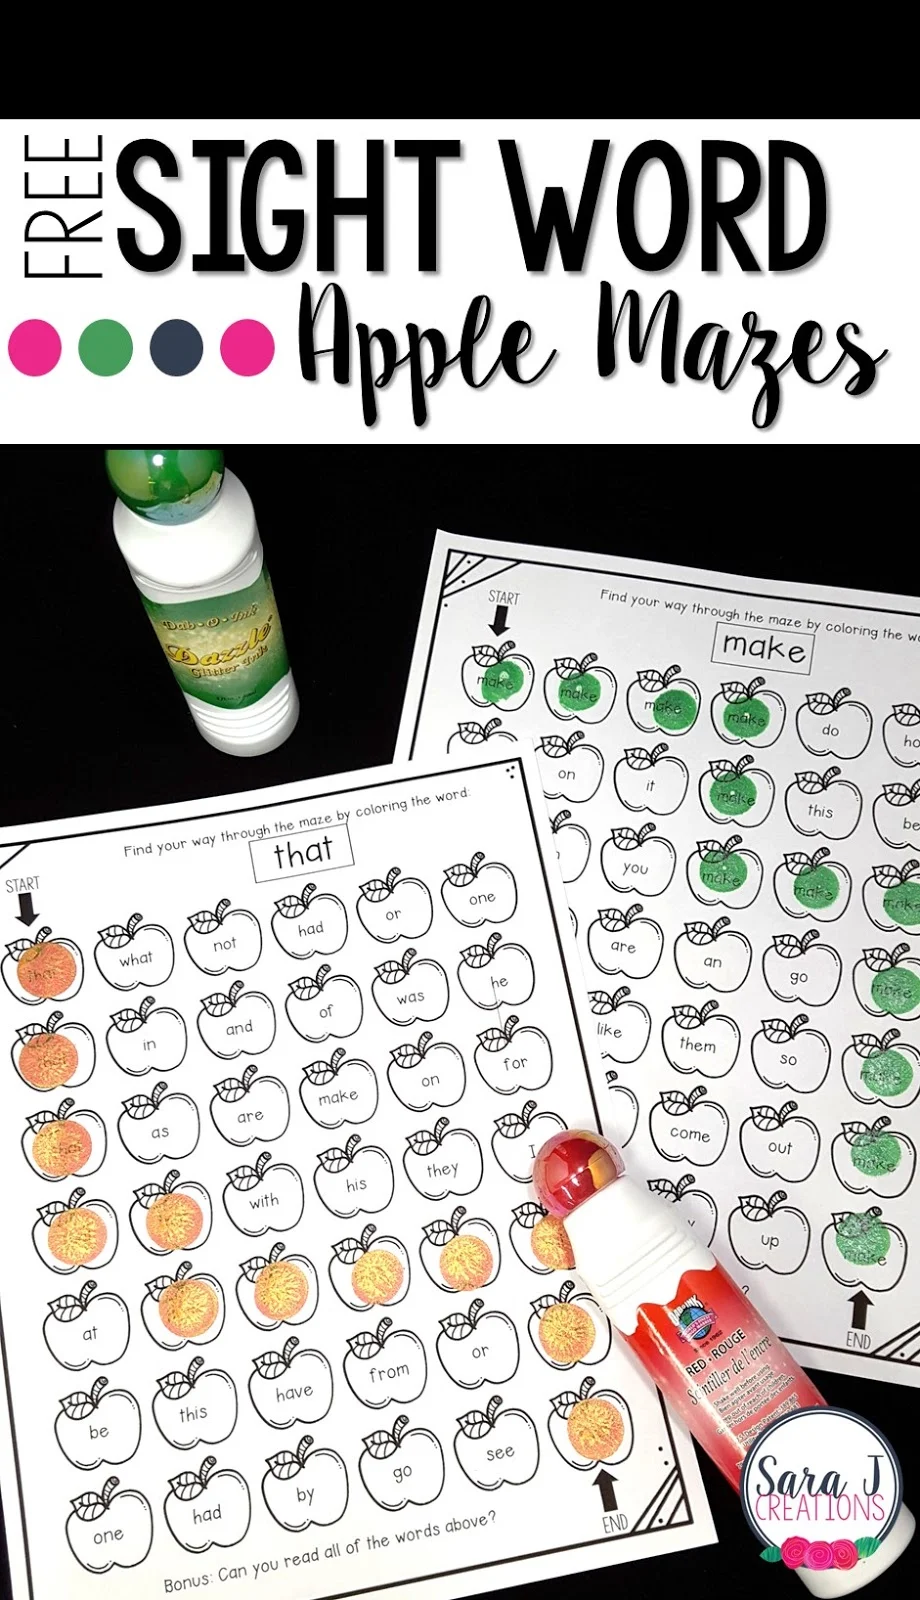 Free sight word practice pages with an apple theme.